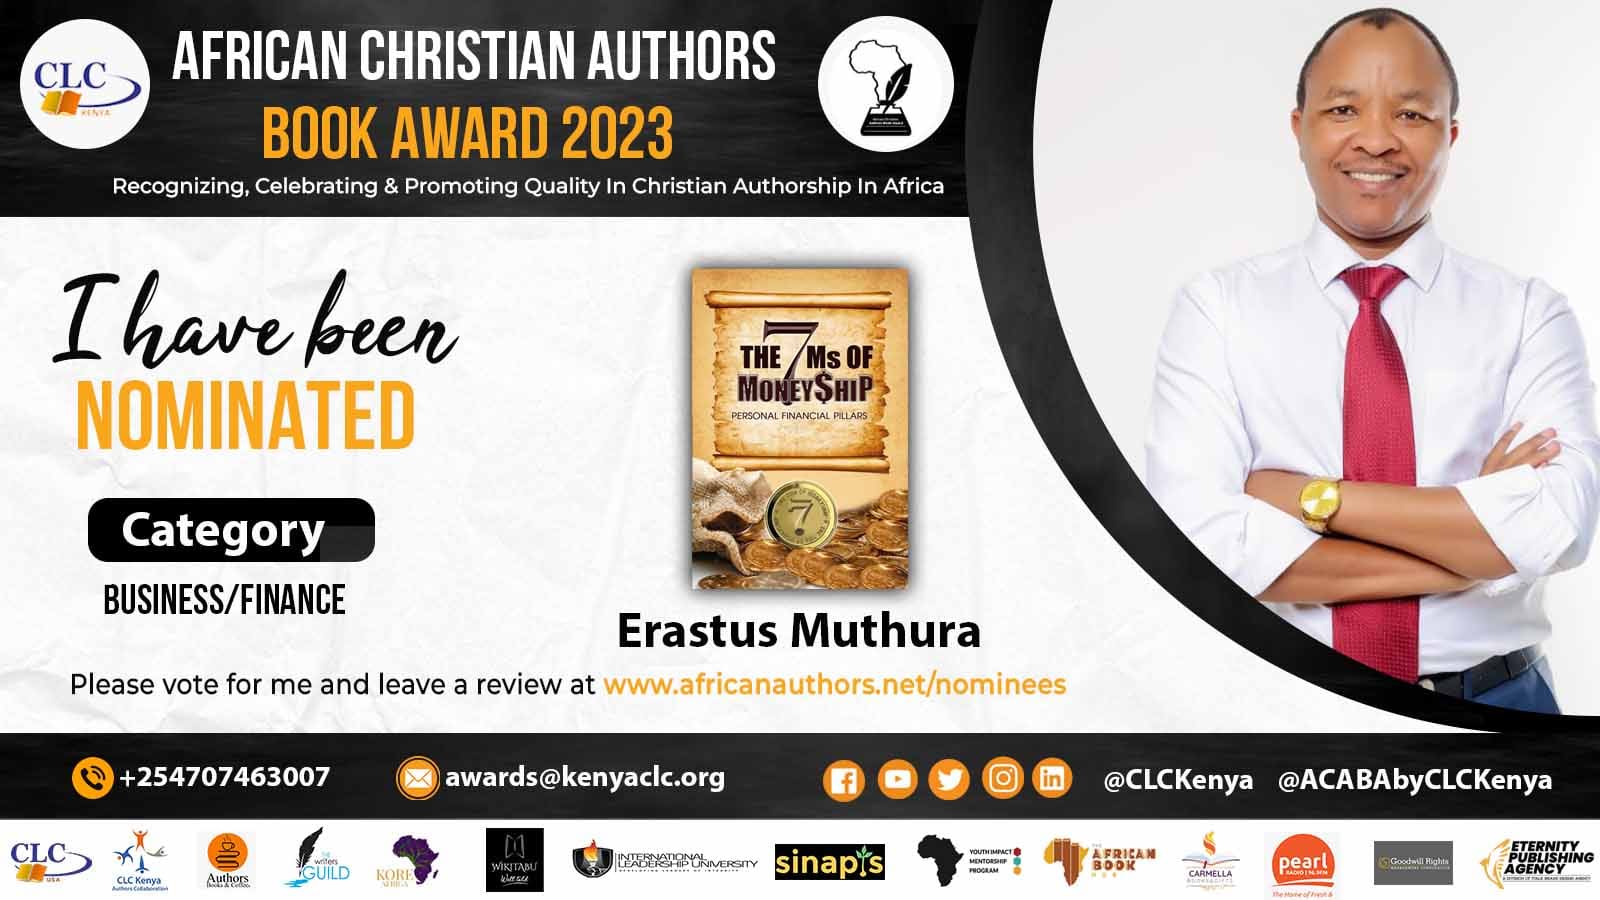 Erastus Muthura’s Coins Catchy Titles To Drive Reach